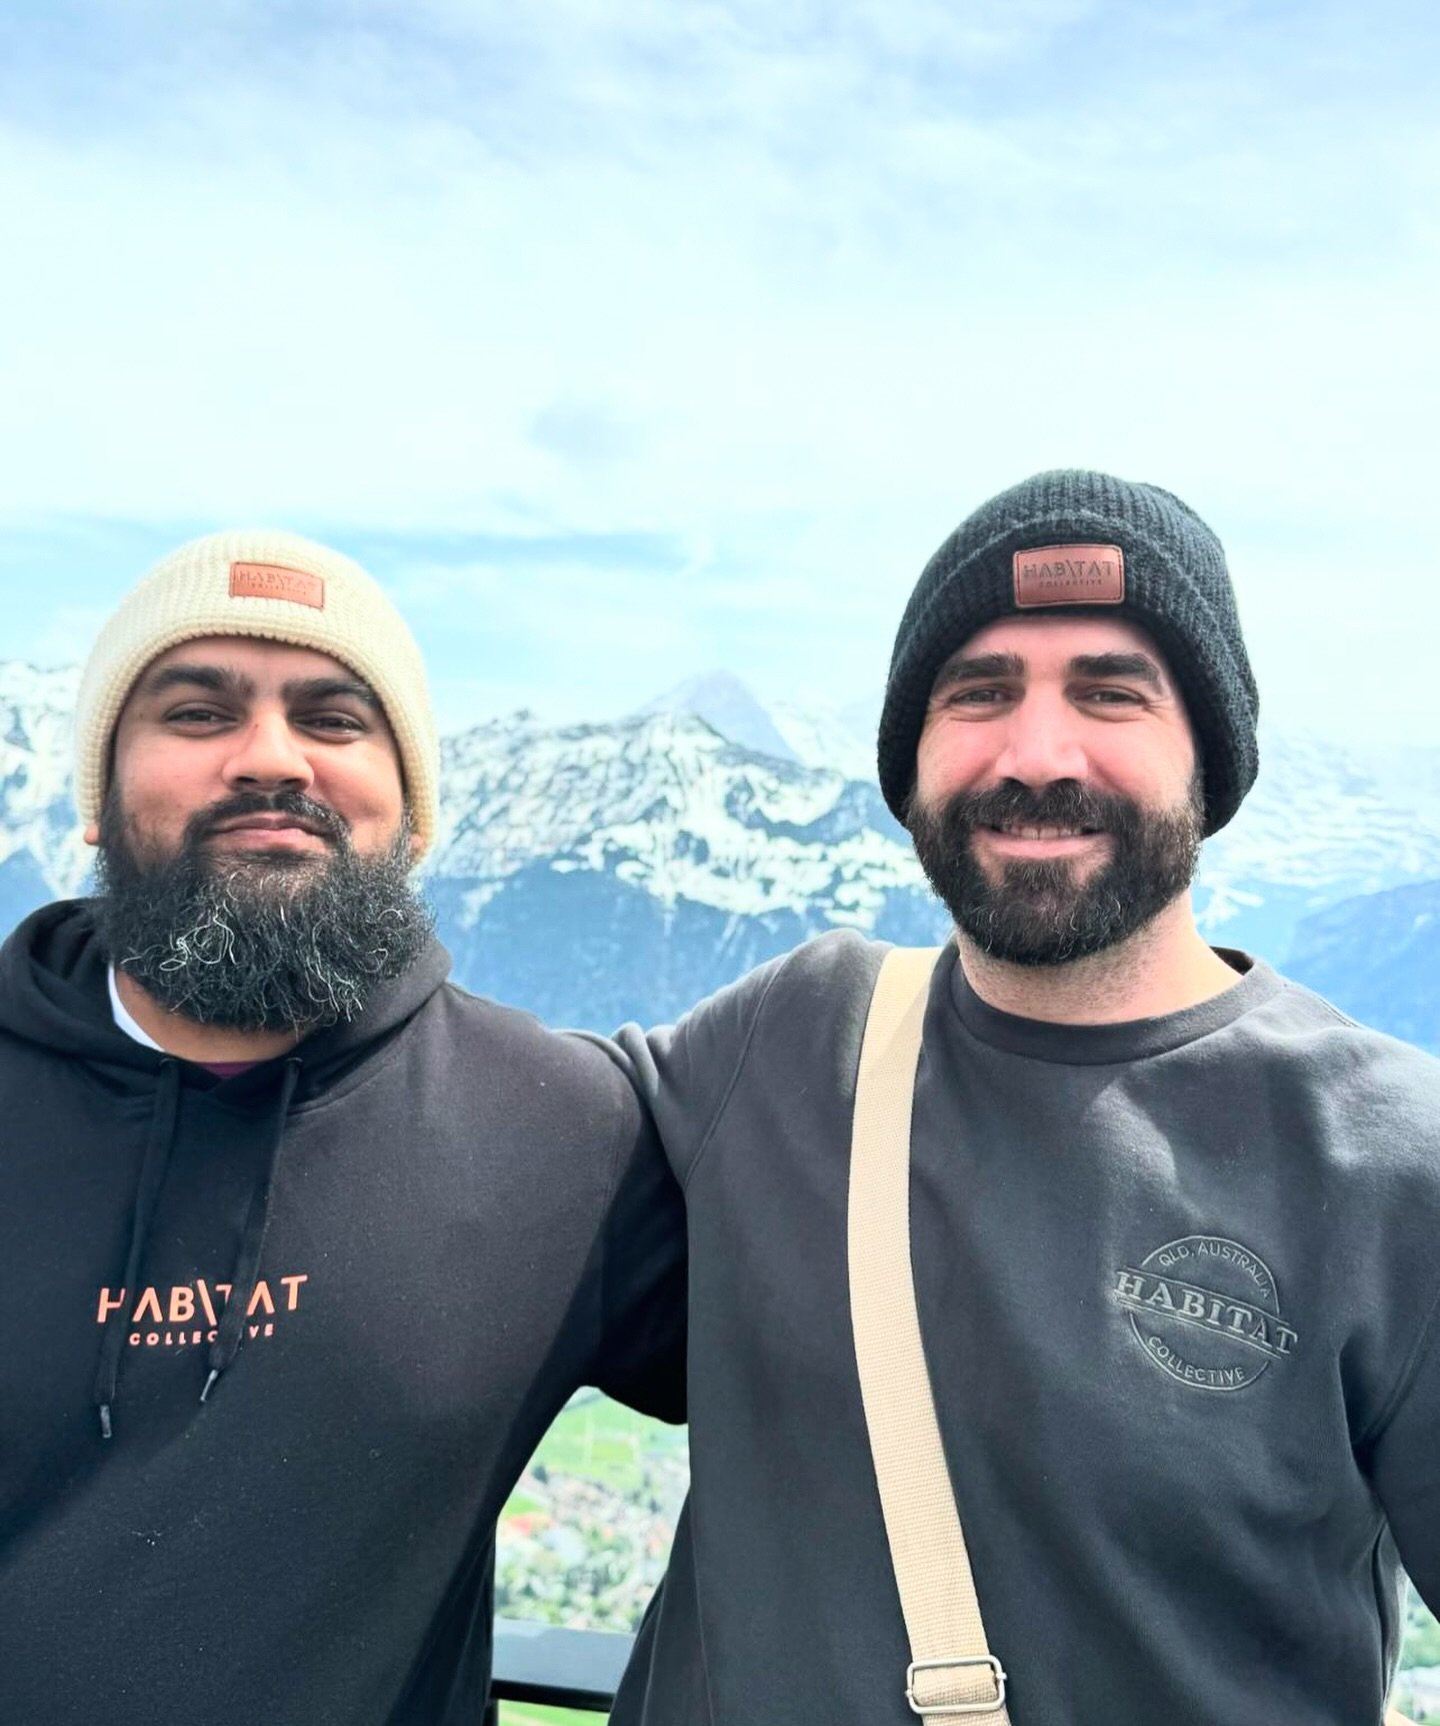 The boys looking dapper &amp; warm in our beanies ☁️
Make sure you get yours before they are gone, stock is low! 

-
#thehabitatcollective #winterfashion #beanieseason #keepingwarm #australianwinter #sunshinecoast #winterapparel